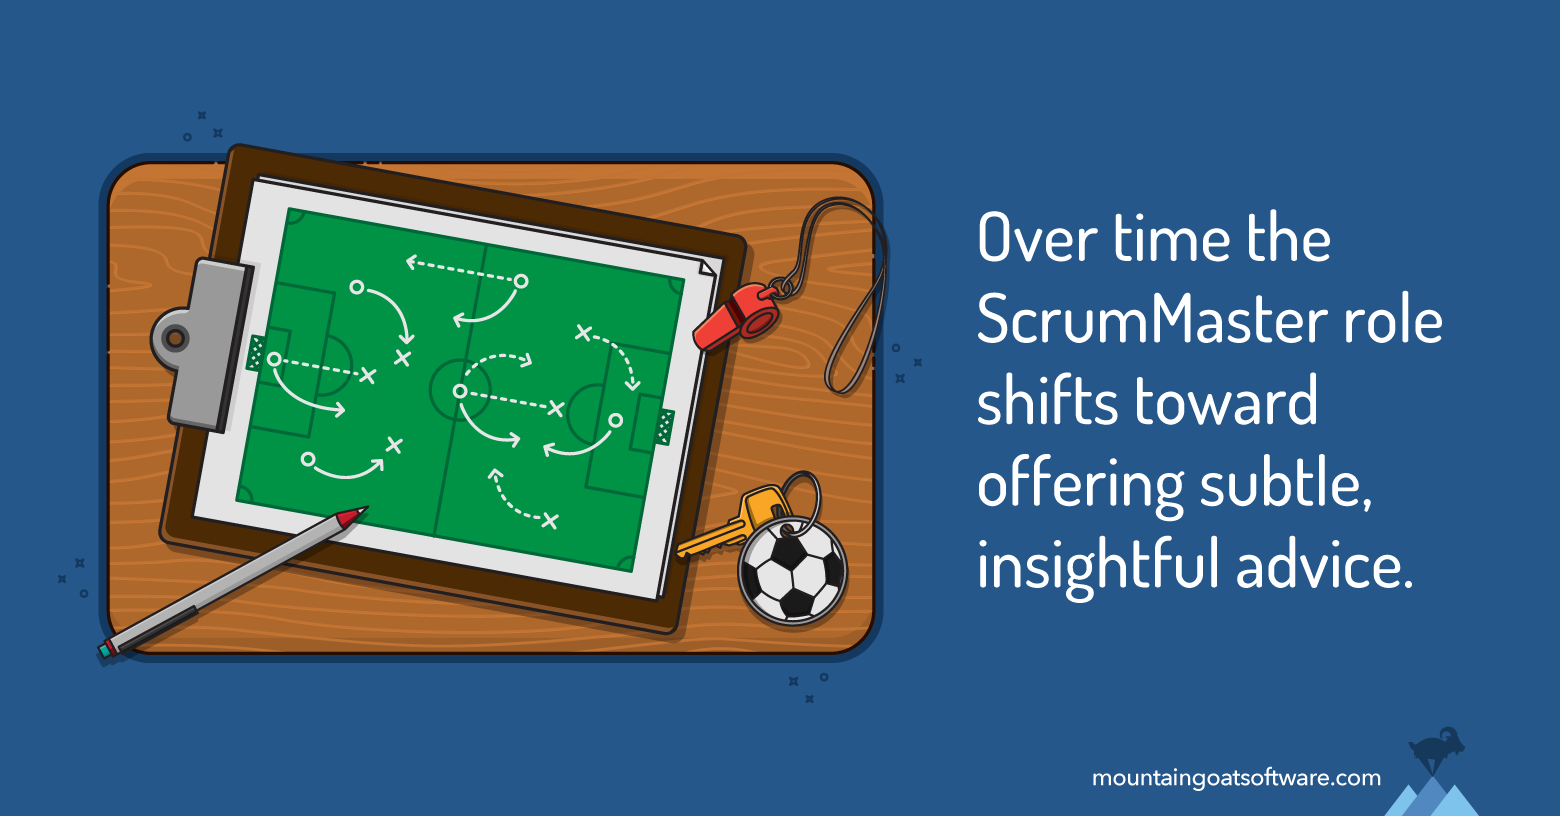 Does Being a ScrumMaster Get Easier Over Time?